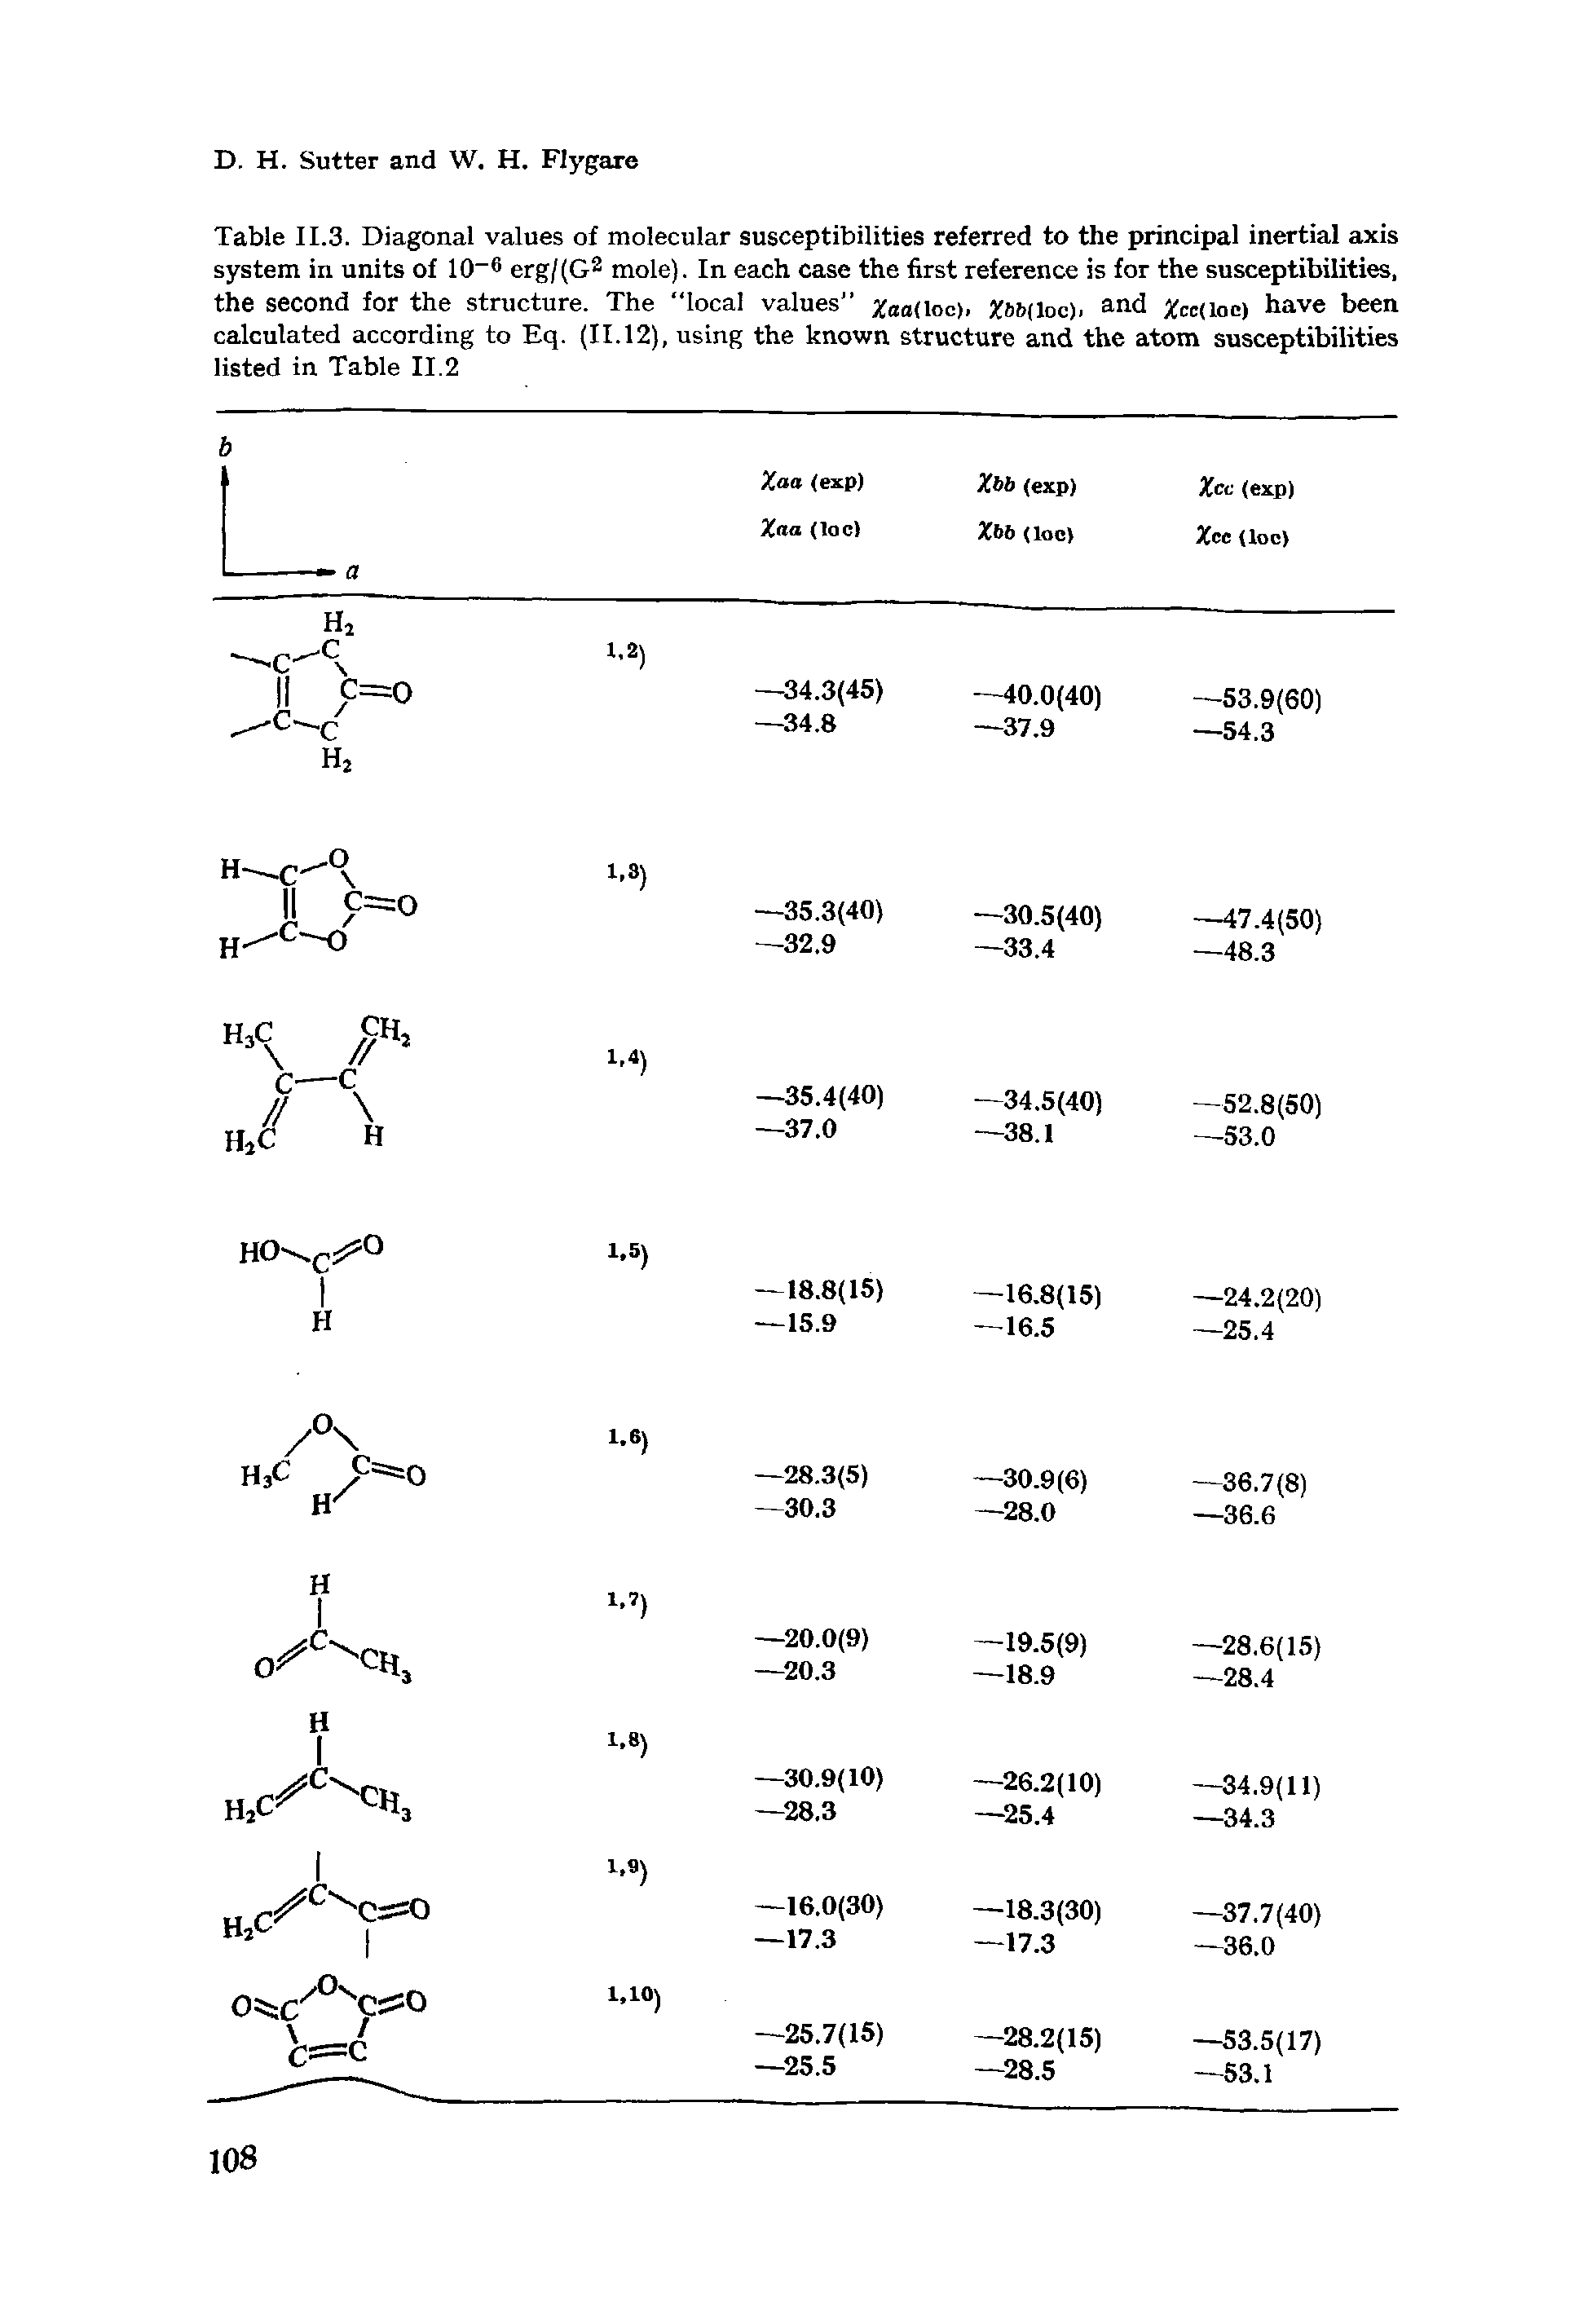 Table II.3. Diagonal values of molecular susceptibilities referred to the principal inertial axis system in units of 10 S erg/(G2 mole). In each case the first reference is for the susceptibilities, the second for the structure. The local values Xaa(loc), Xbb(loc), Jfcc(ioc) have been calculated according to Eq. (11.12), using the known structure and the atom susceptibilities listed in Table II.2...